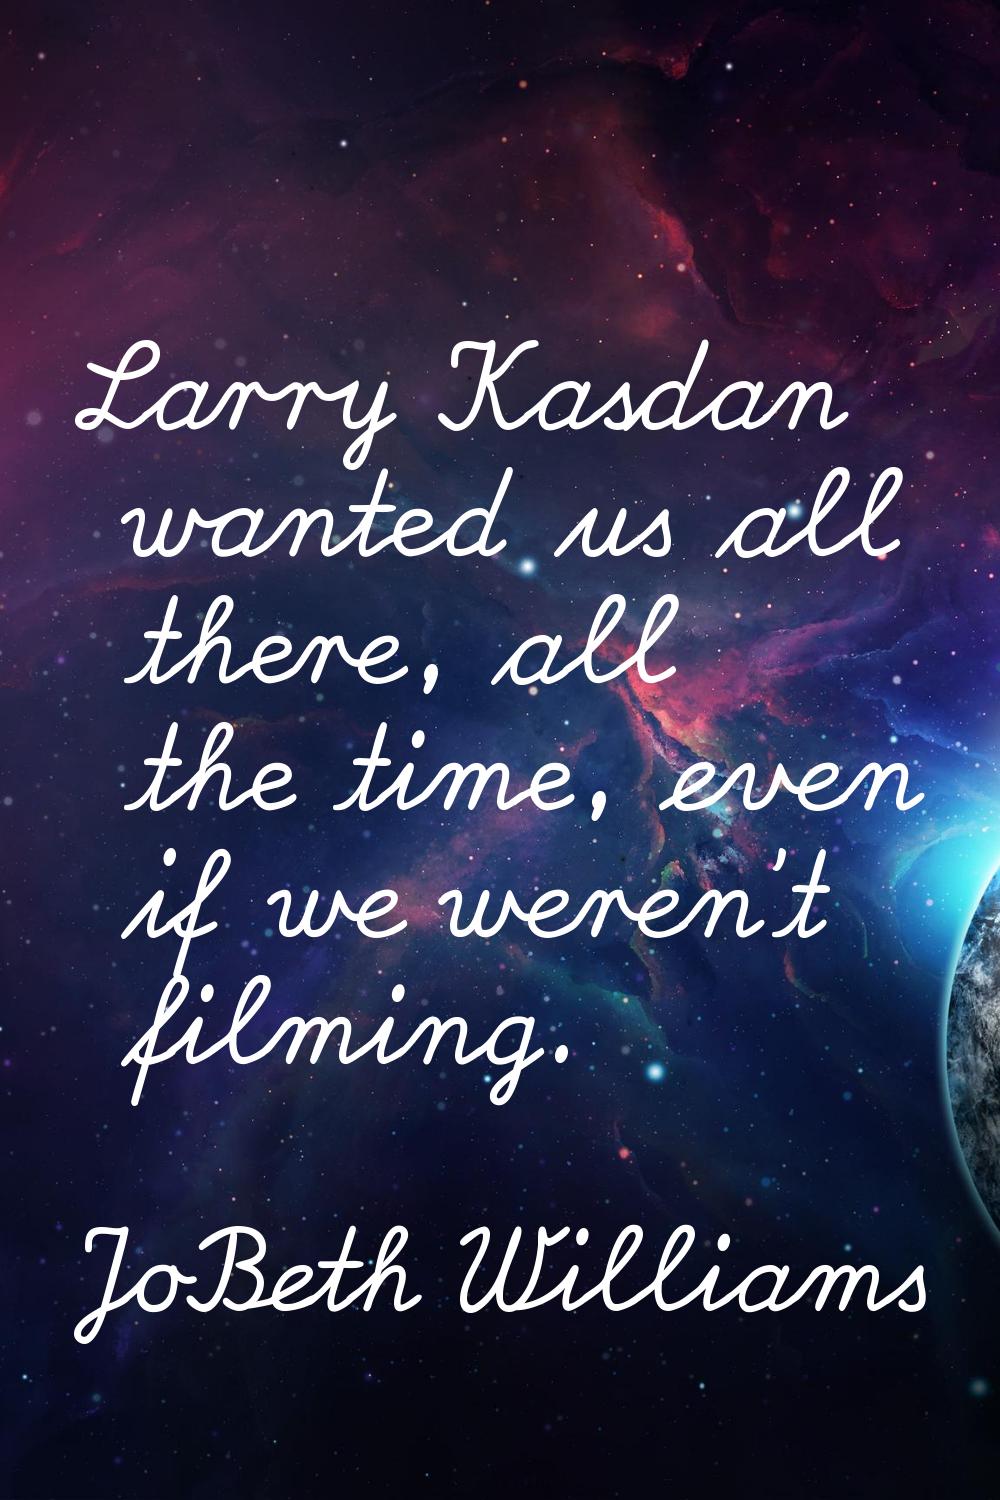 Larry Kasdan wanted us all there, all the time, even if we weren't filming.